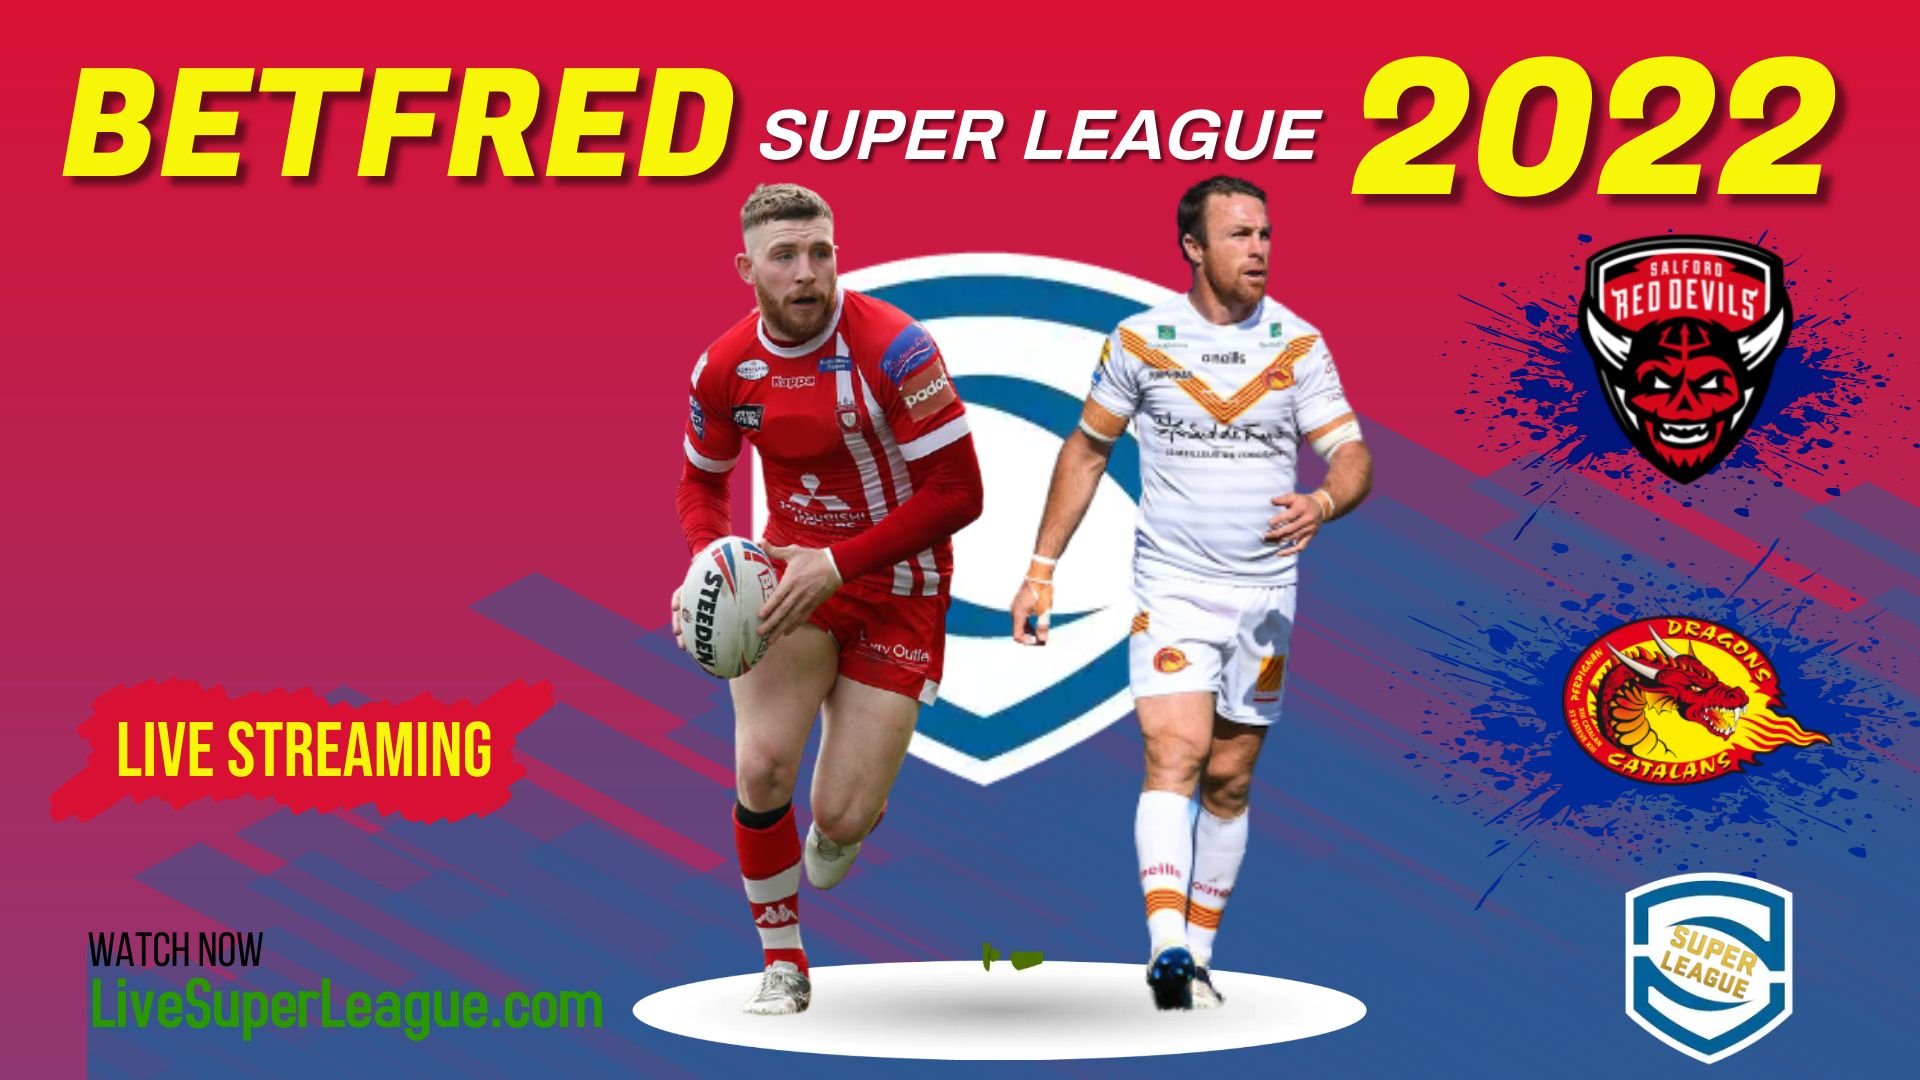 Catalans Dragons Vs Salford Red Devils RD 24 Live Stream 2022 | Full Match Replay